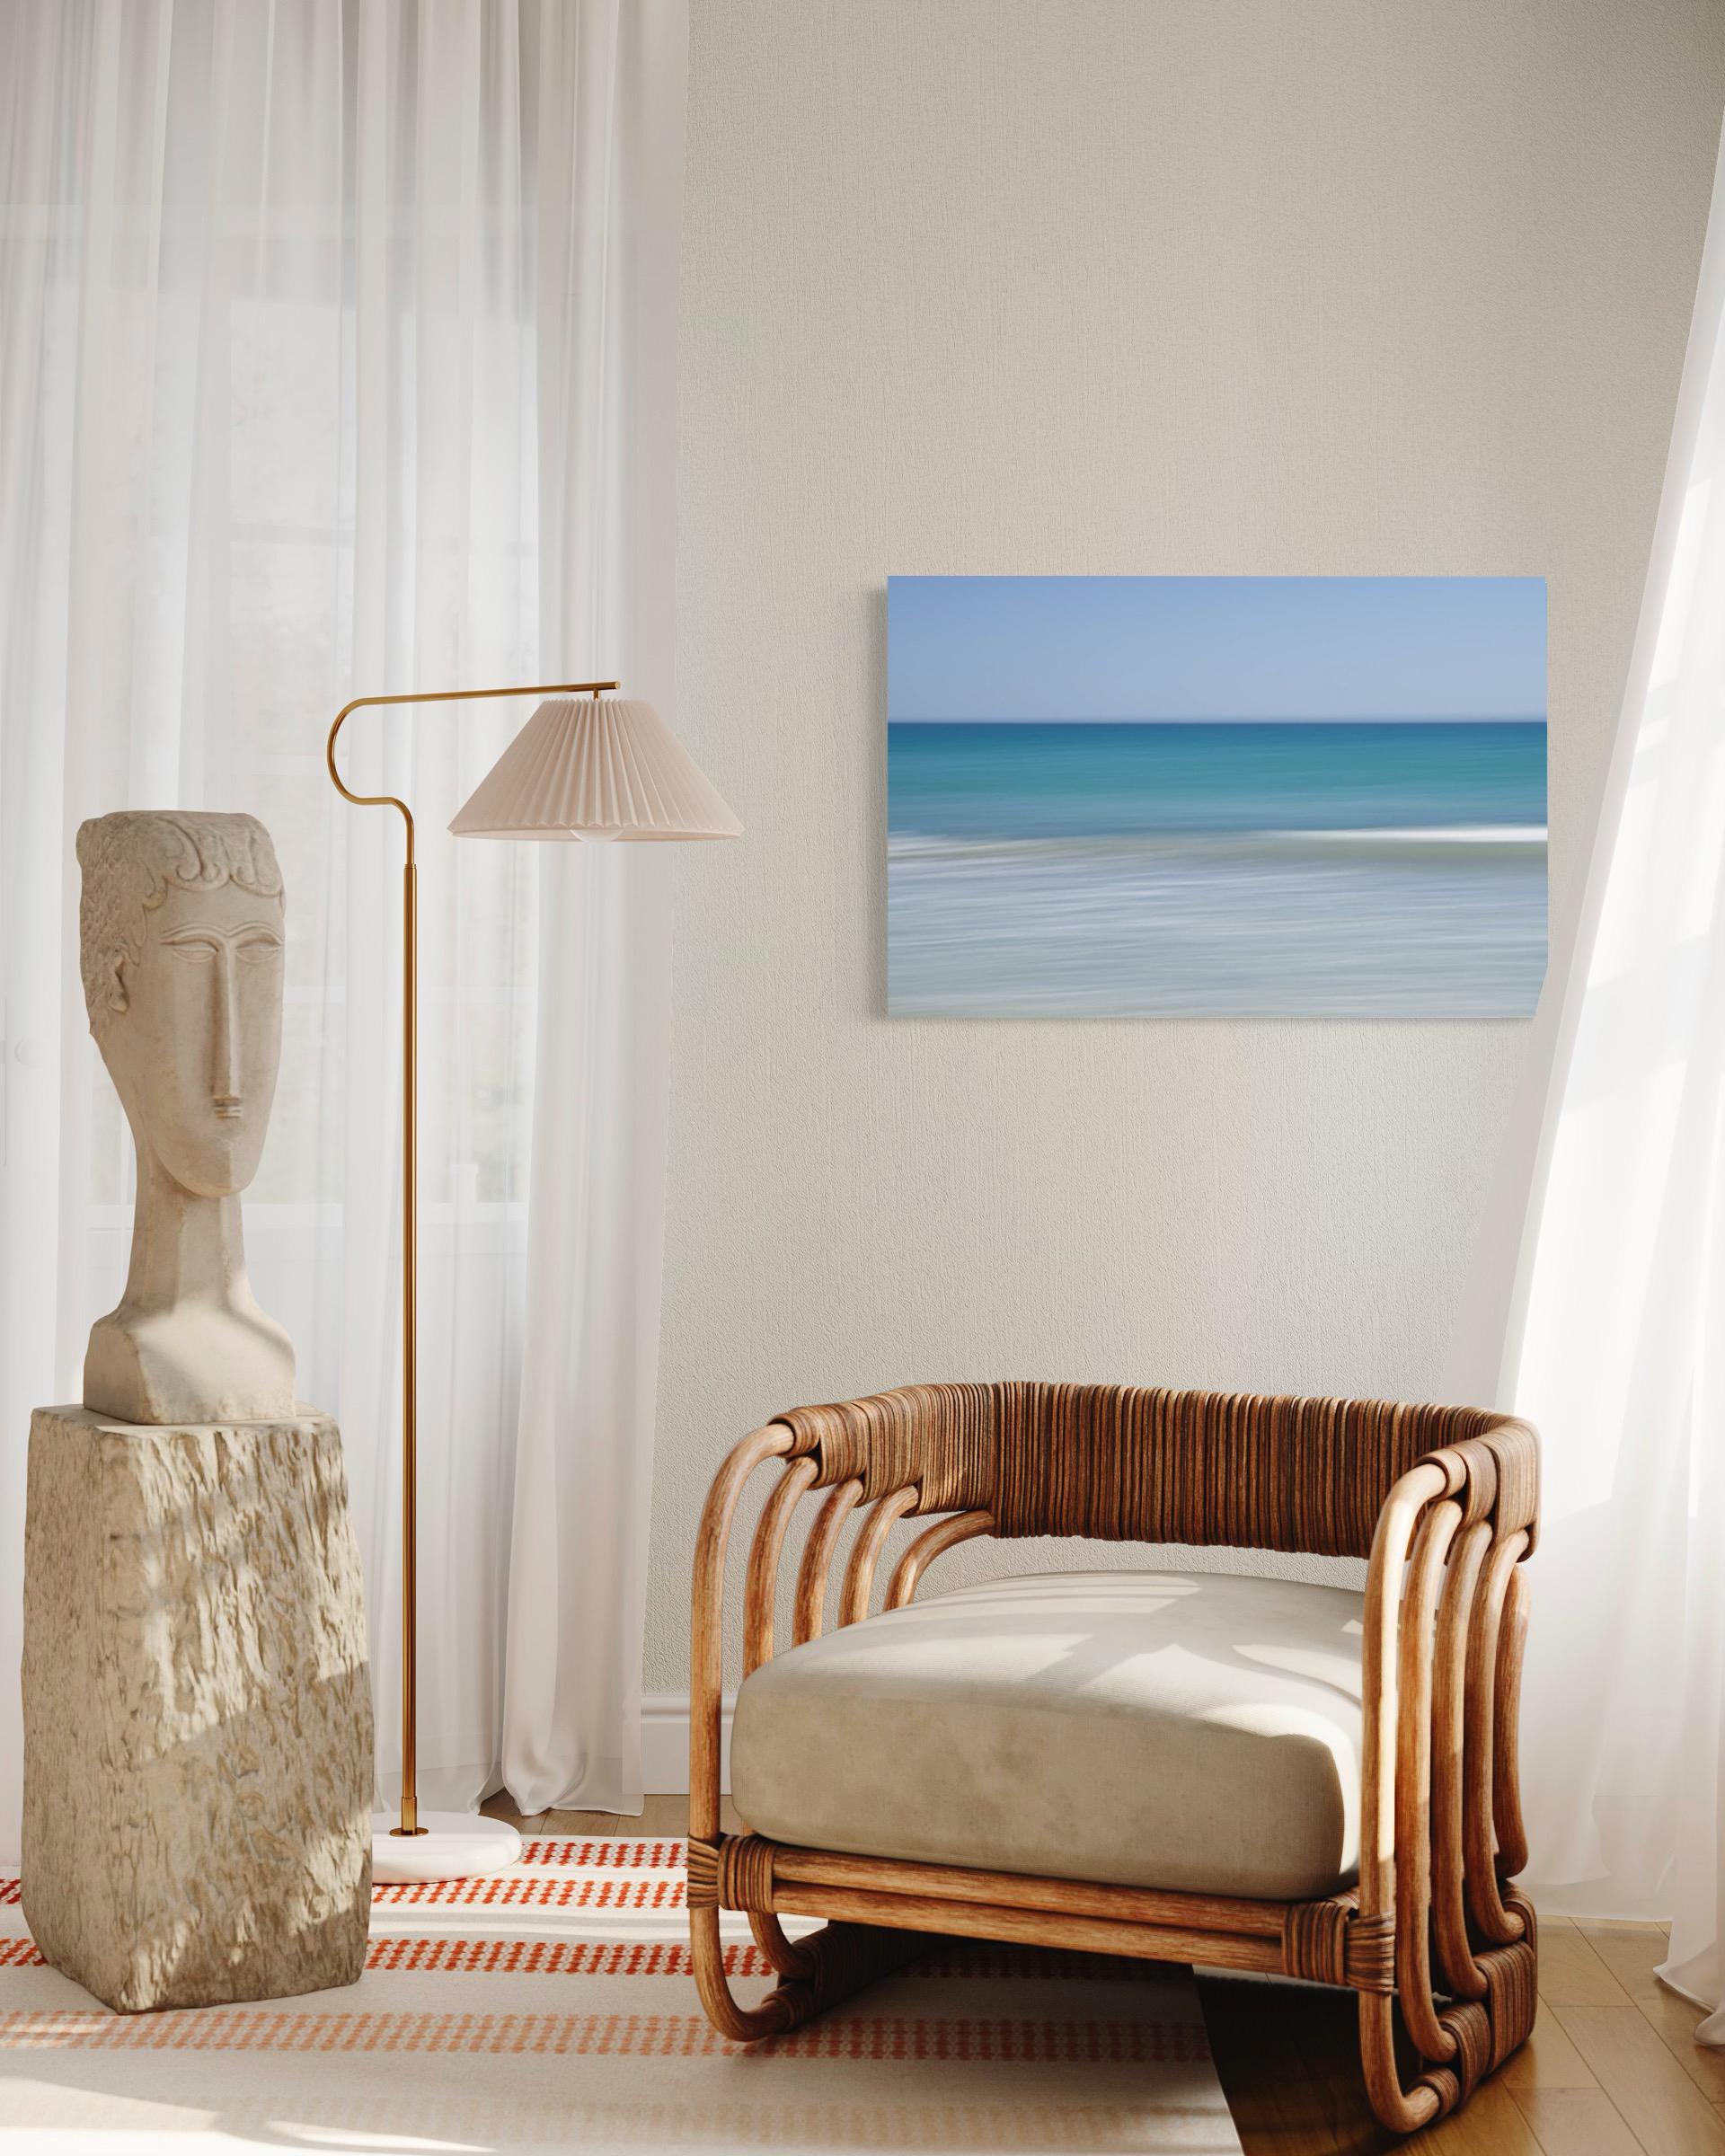 This photograph by Tori Gagne features an abstracted seascape composition and a coastal blue, turquoise, and white palette. An edition size of 50, this photograph by Tori Gagne is available as a metal sublimation print with a 1.3” deep silver flush